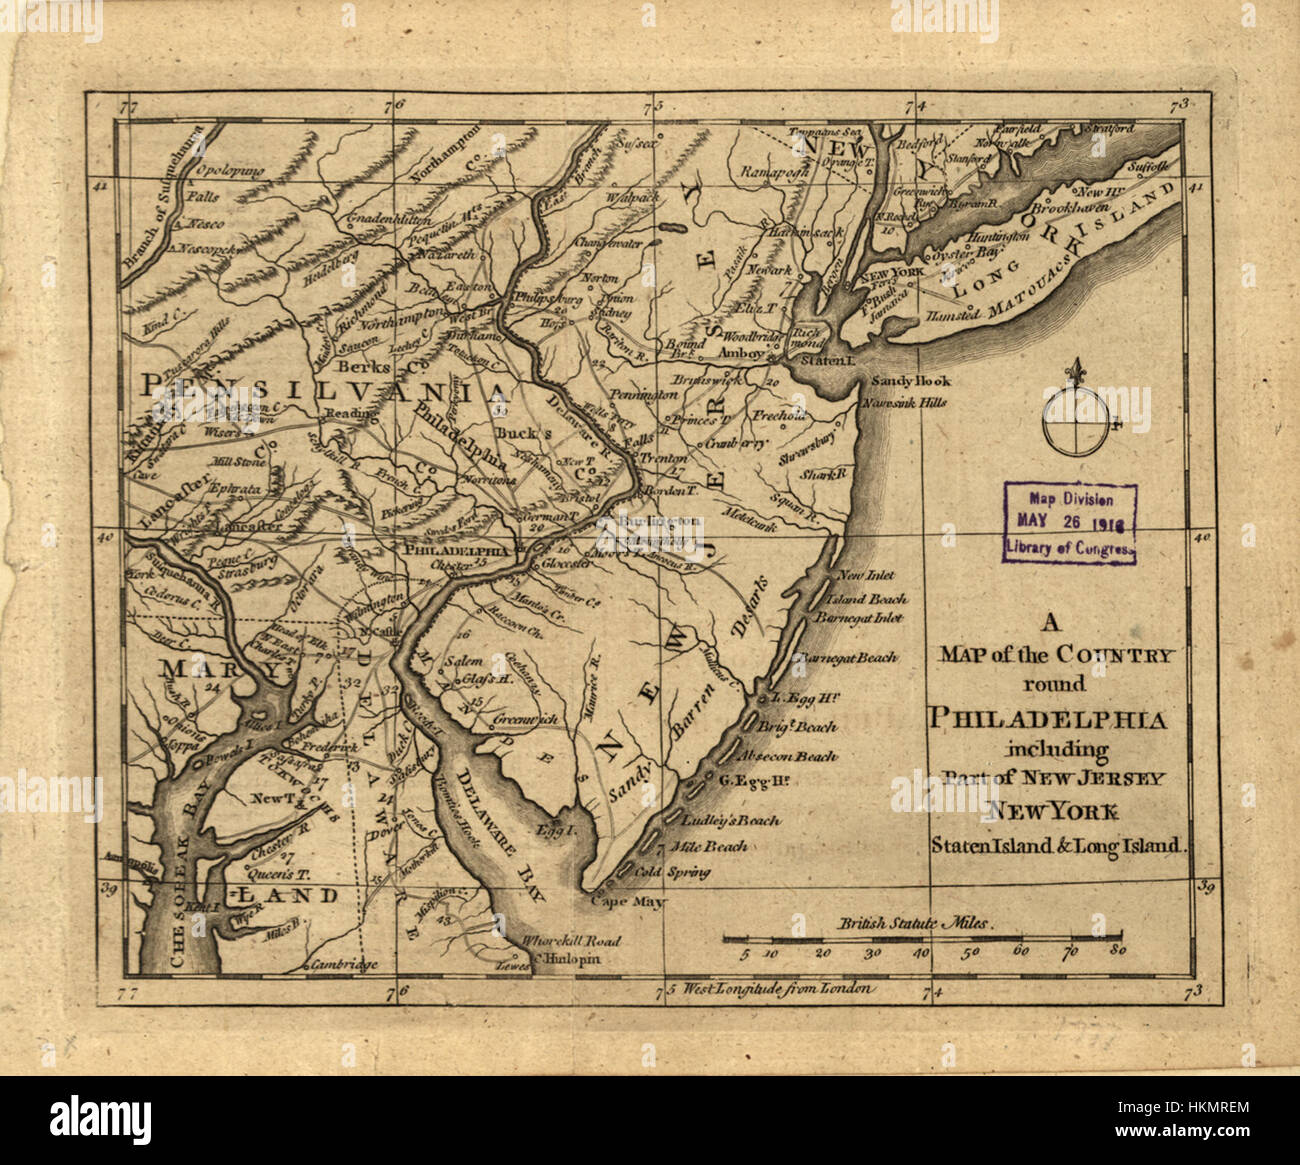 A Map of the Country round Philadelphia Including Part of New Jersey and New York, 1776 WDL9577 Stock Photo